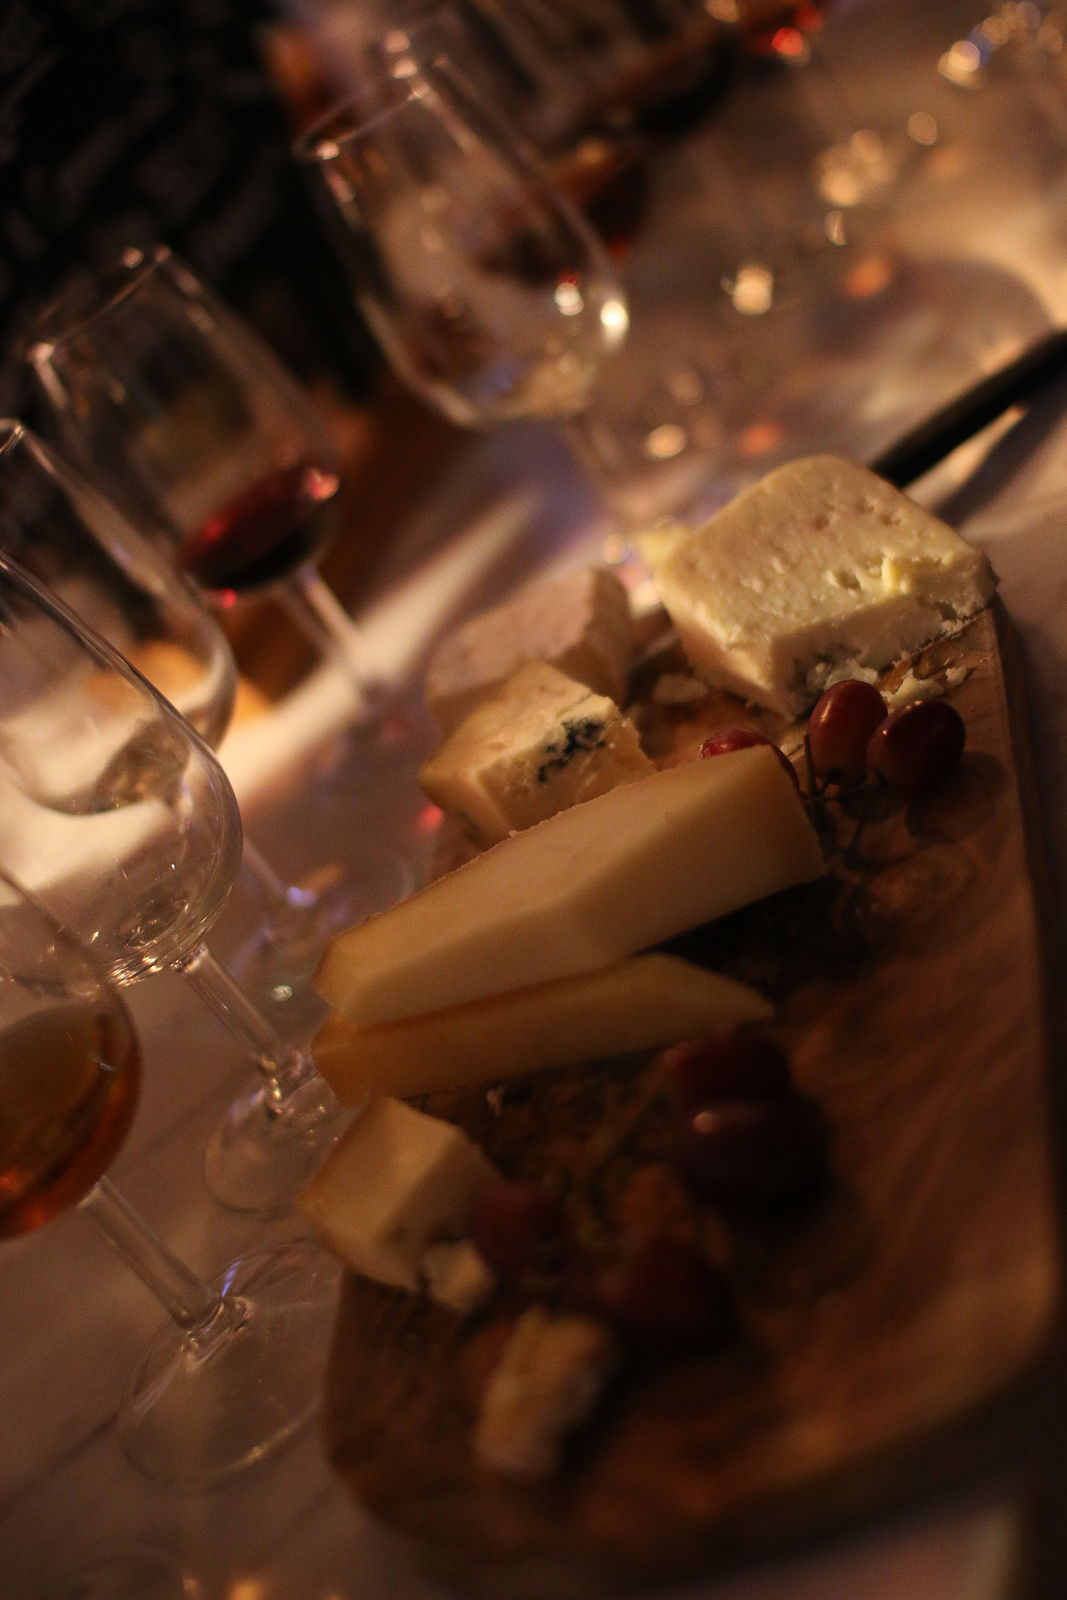 Friends of Ham: Cheese and Fortified Wine night